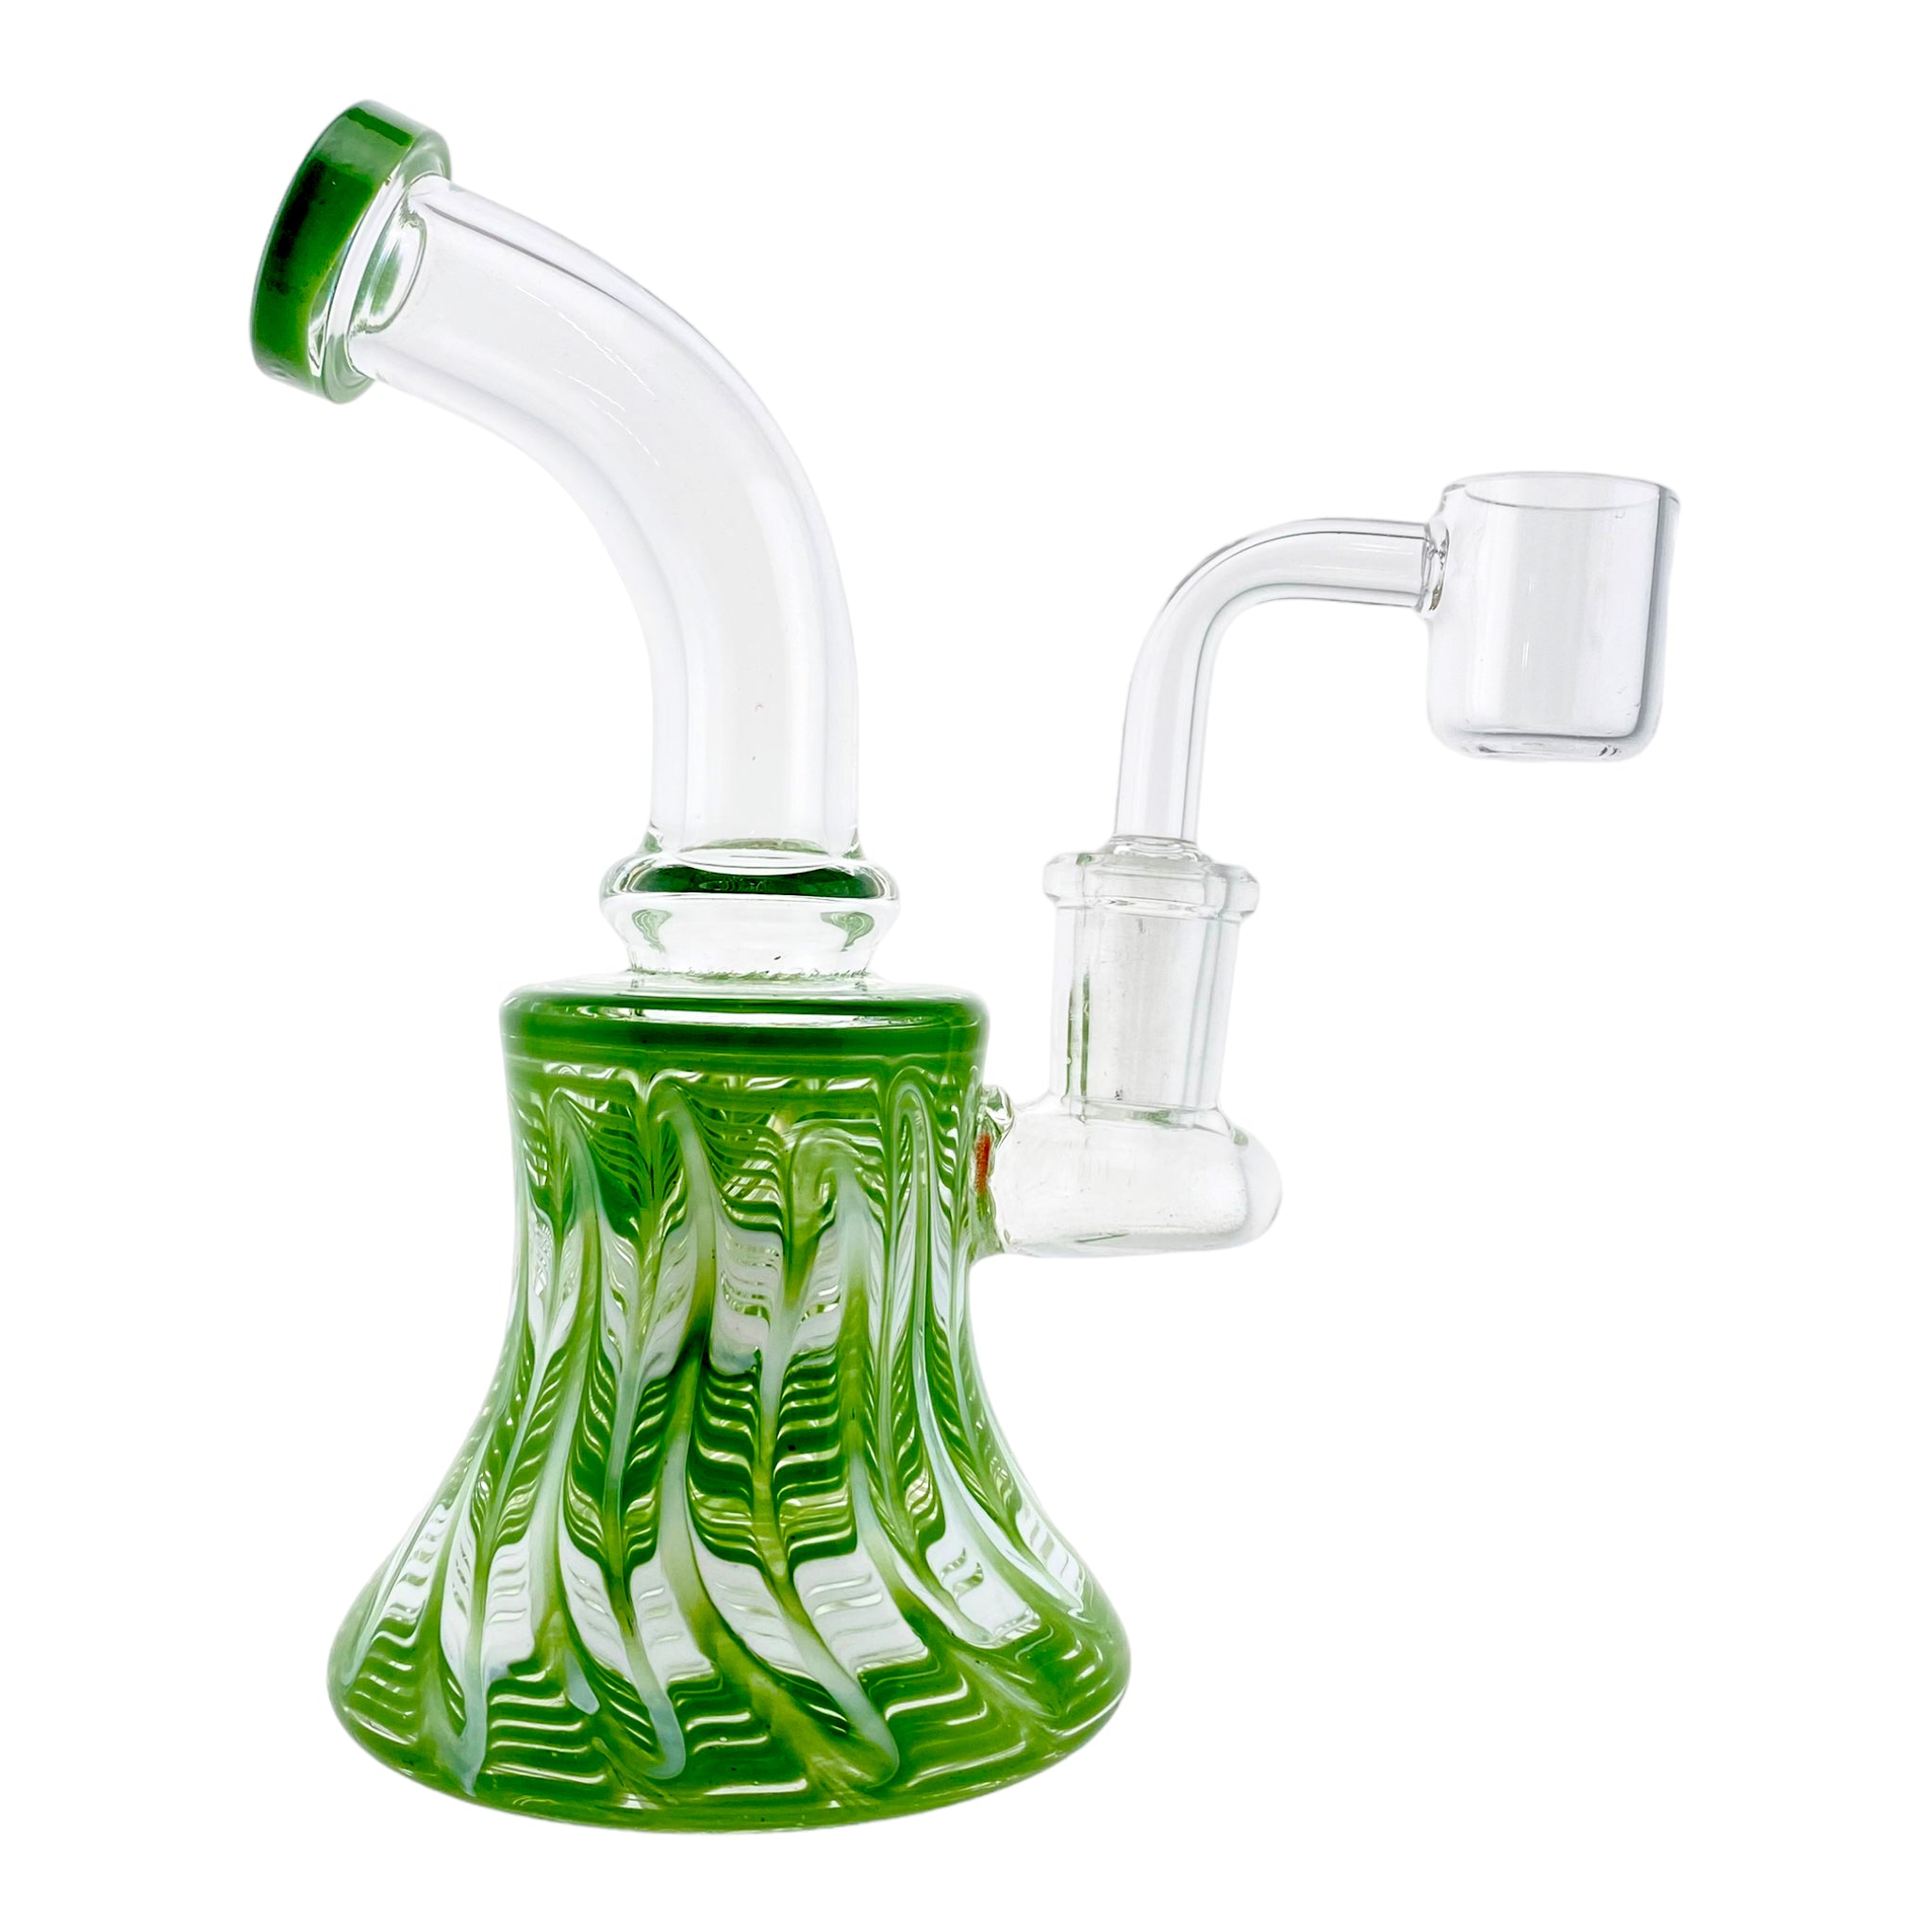 Small Dab Rig With Green Wrap And Rake